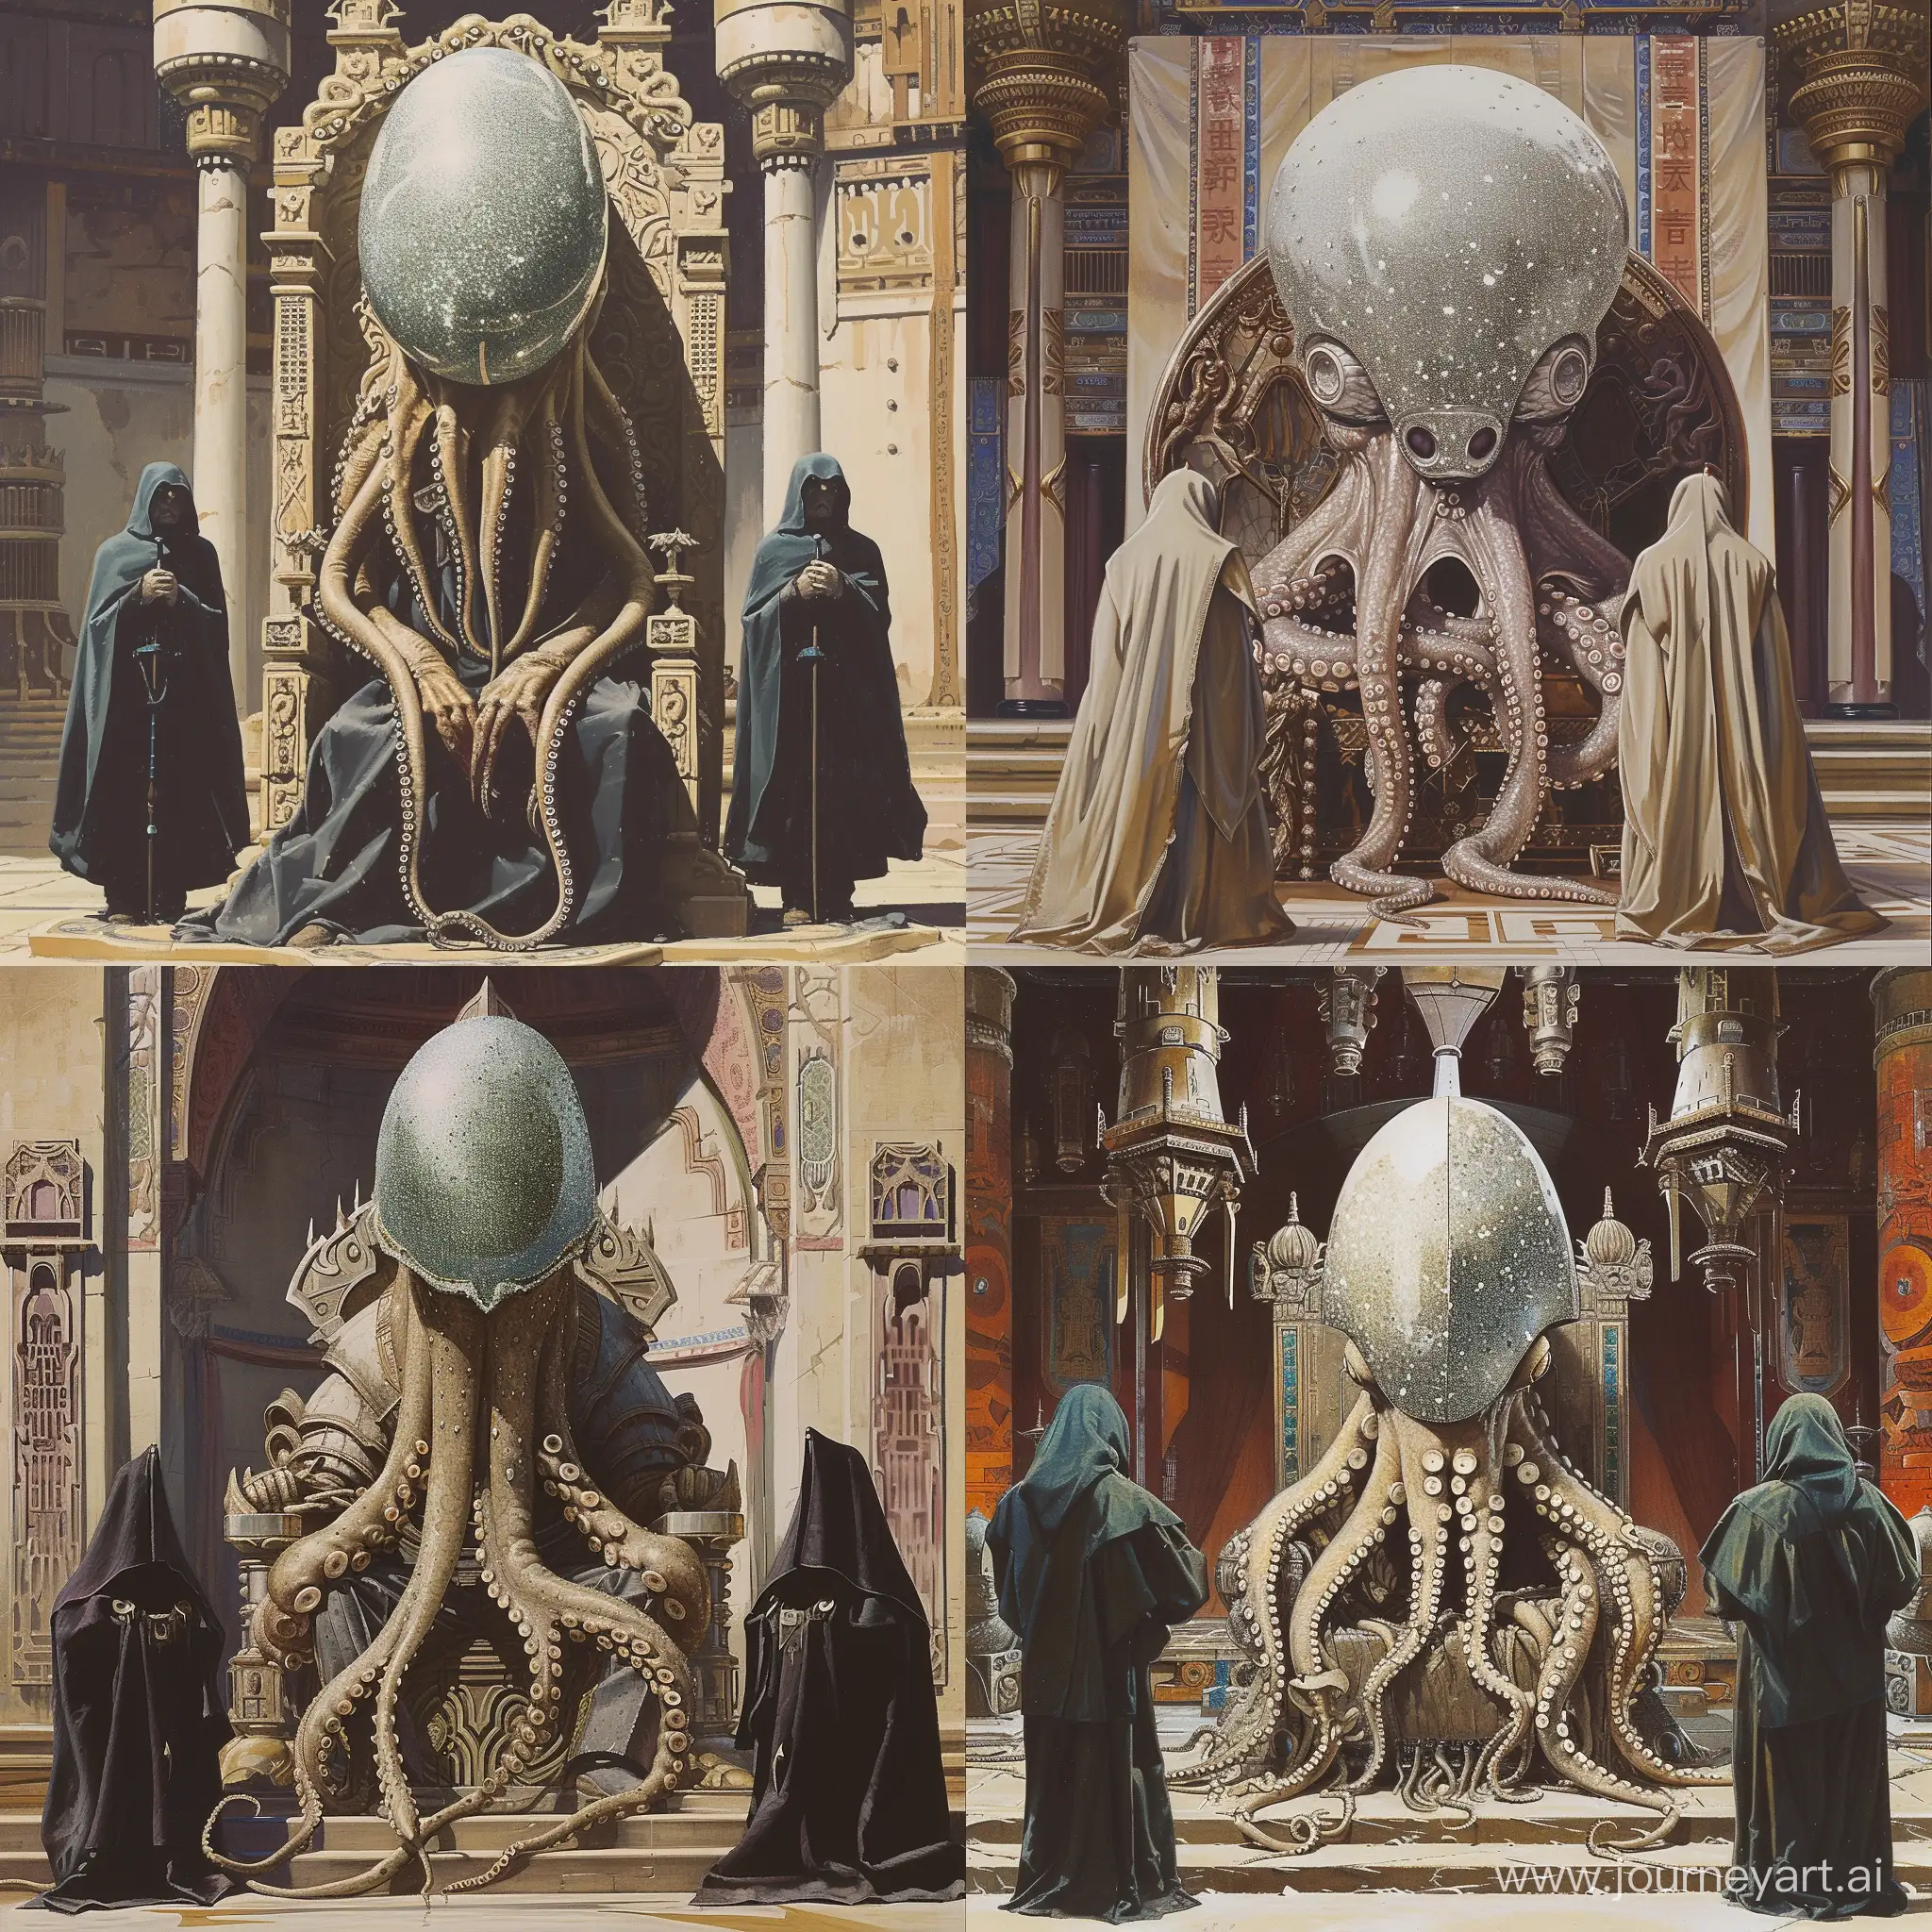 a large cephalopod-like alien in a large nacre helmet with tentacles resting in a throne painted by Ralph Mcquarrie.  in oriental palace setting. flanked by two smaller cloaked humanoid guards. retro science fiction art style. in color. 
